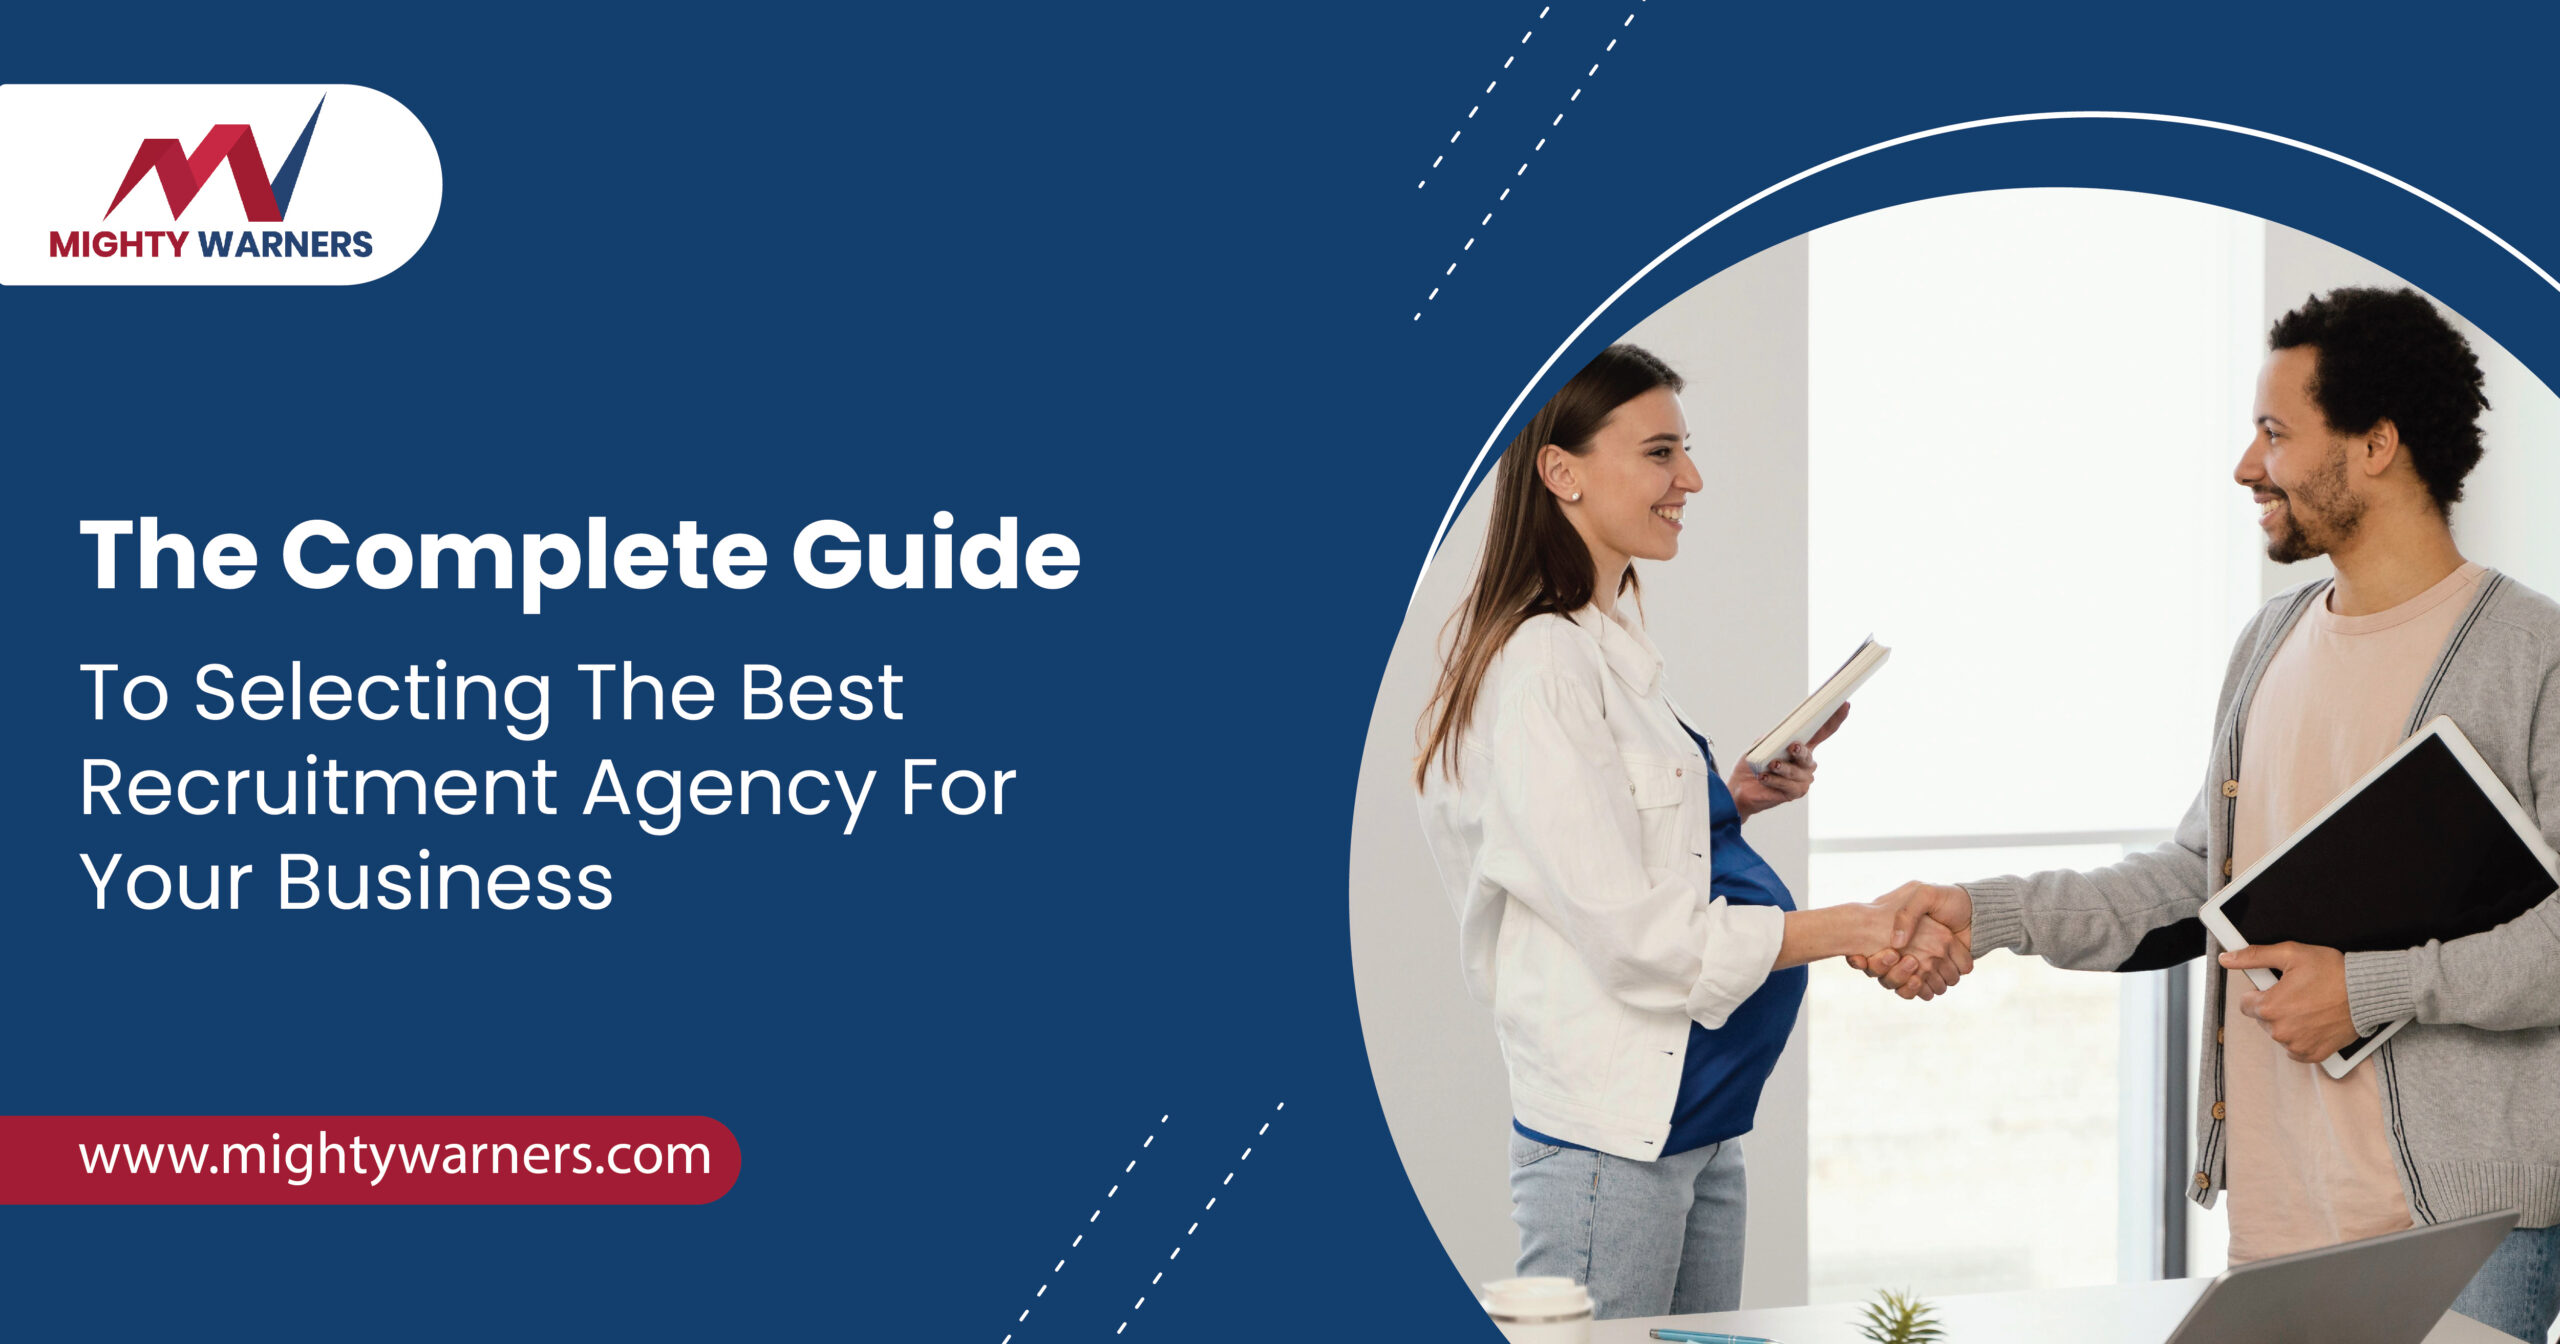 The Complete Guide to Selecting the Best Recruitment Agency for Your Business